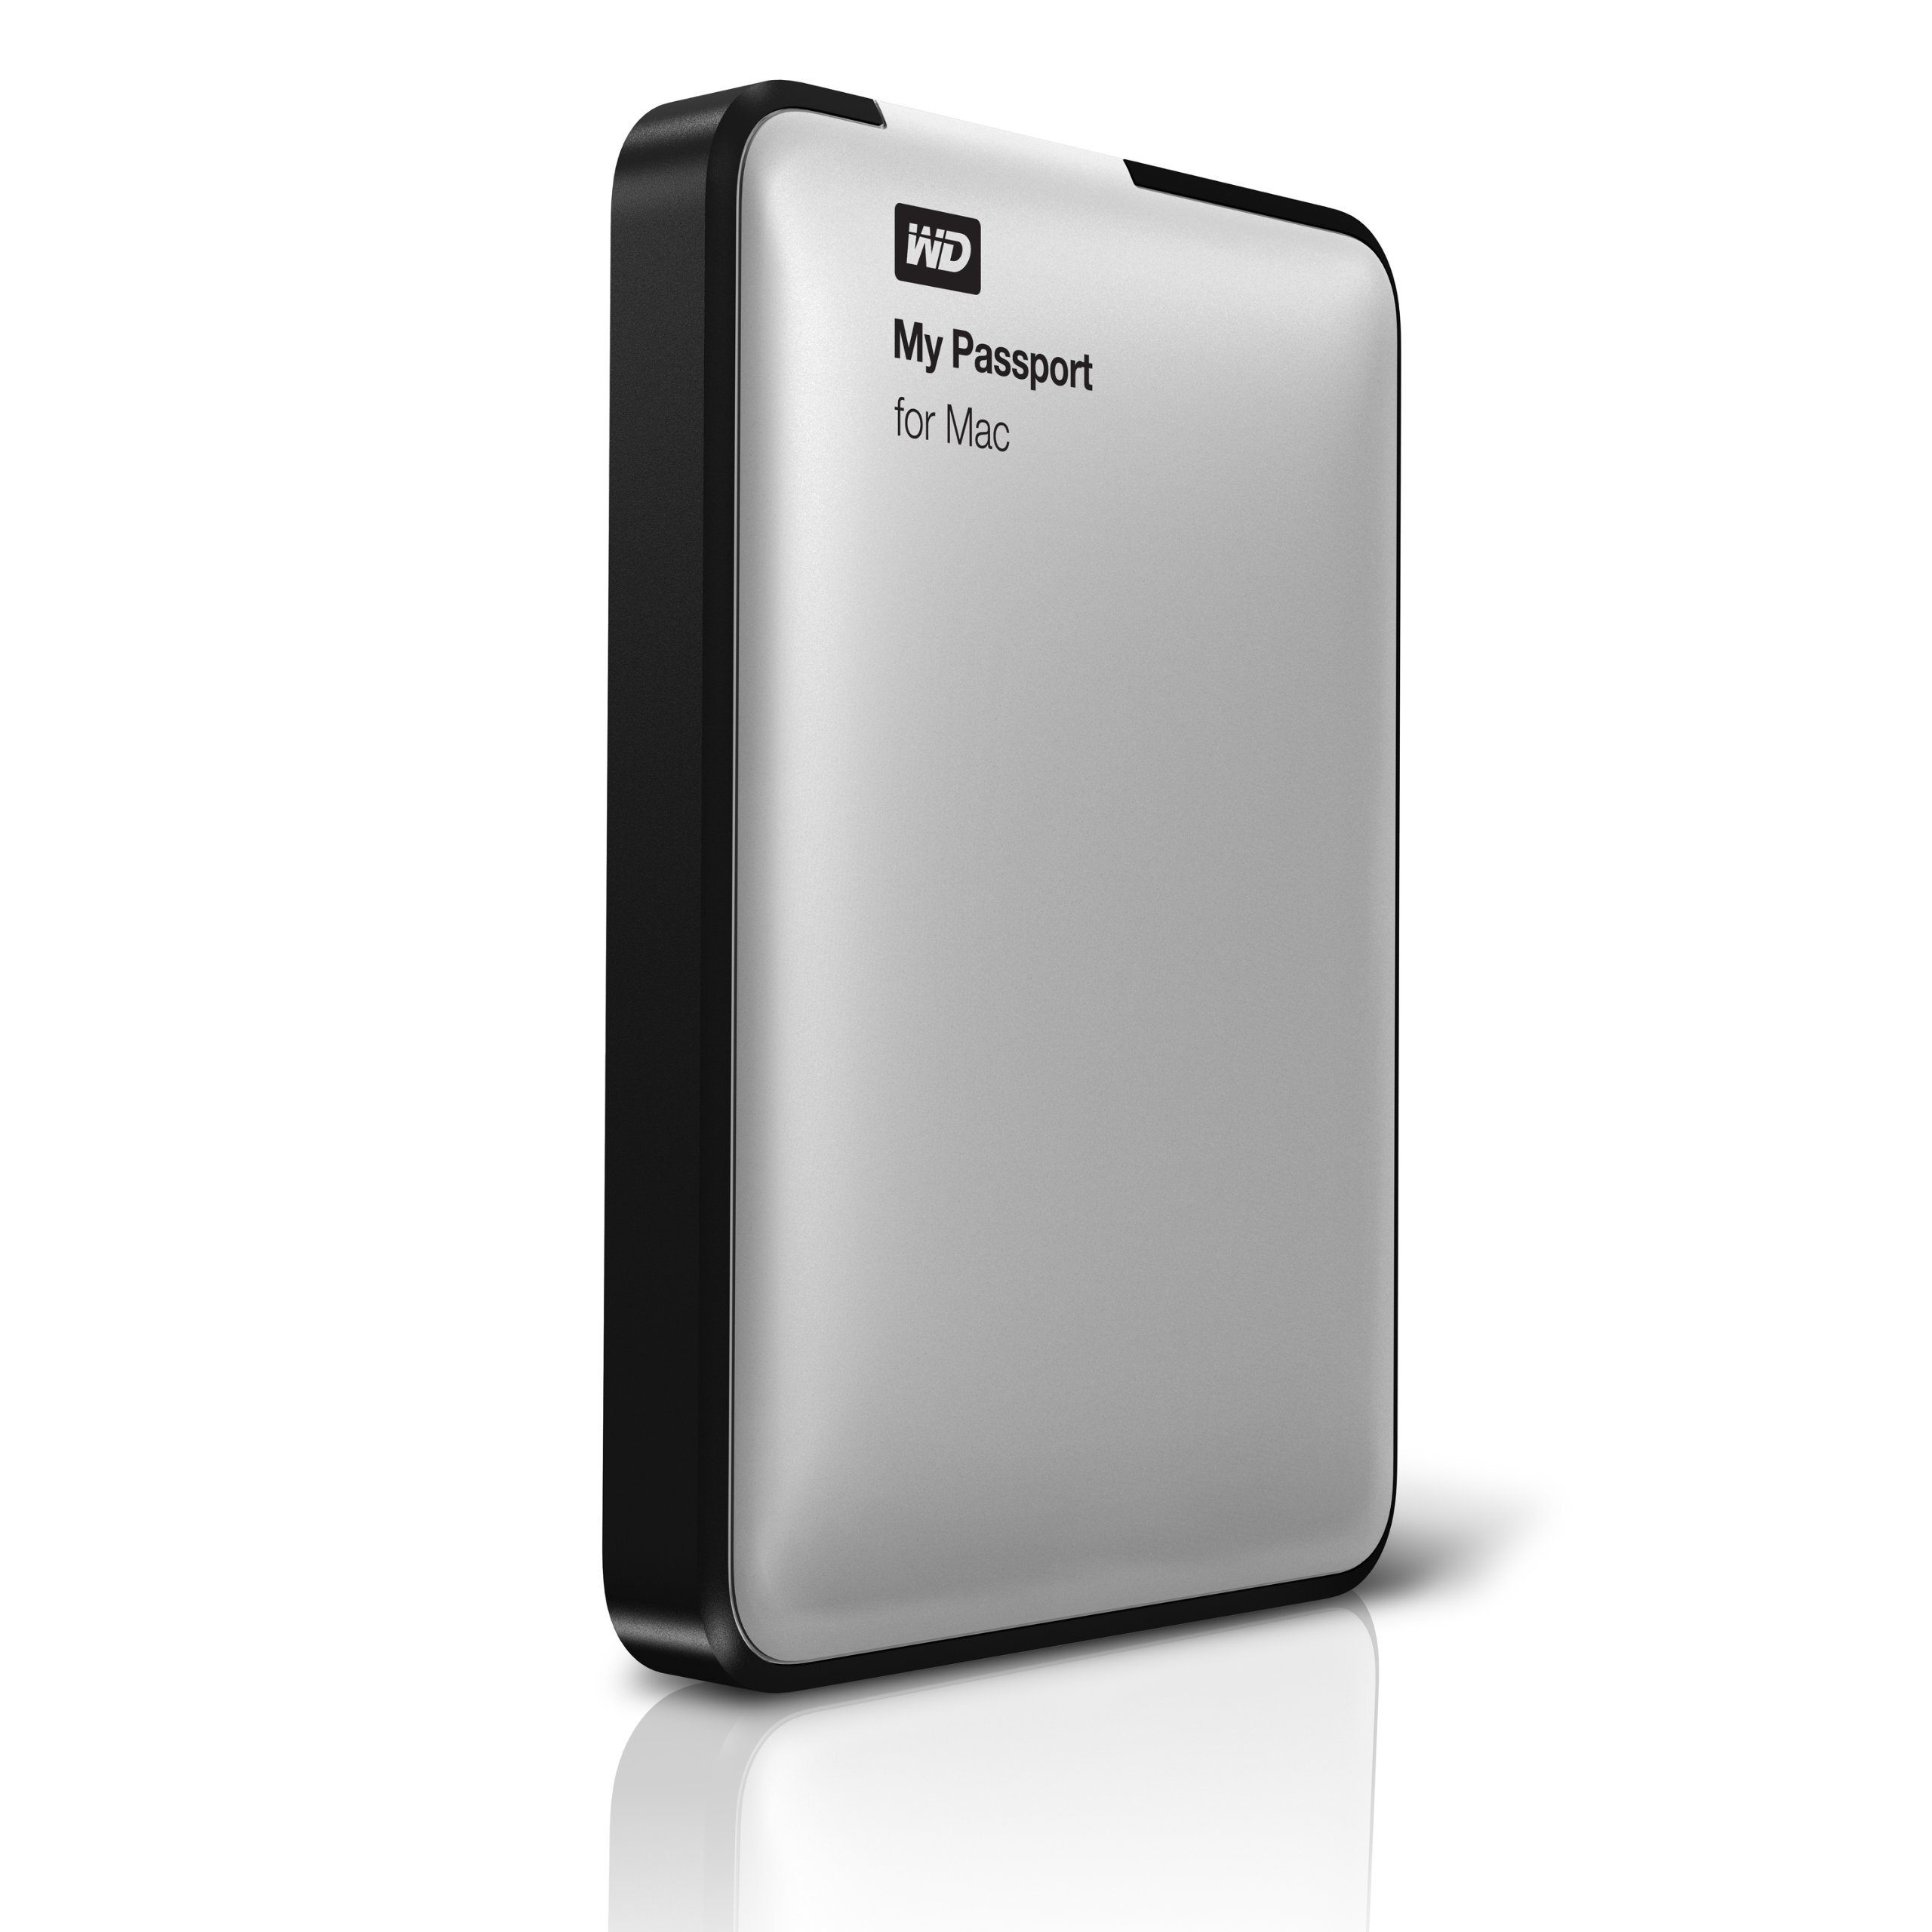 wd my passport for mac 1tb format for pc